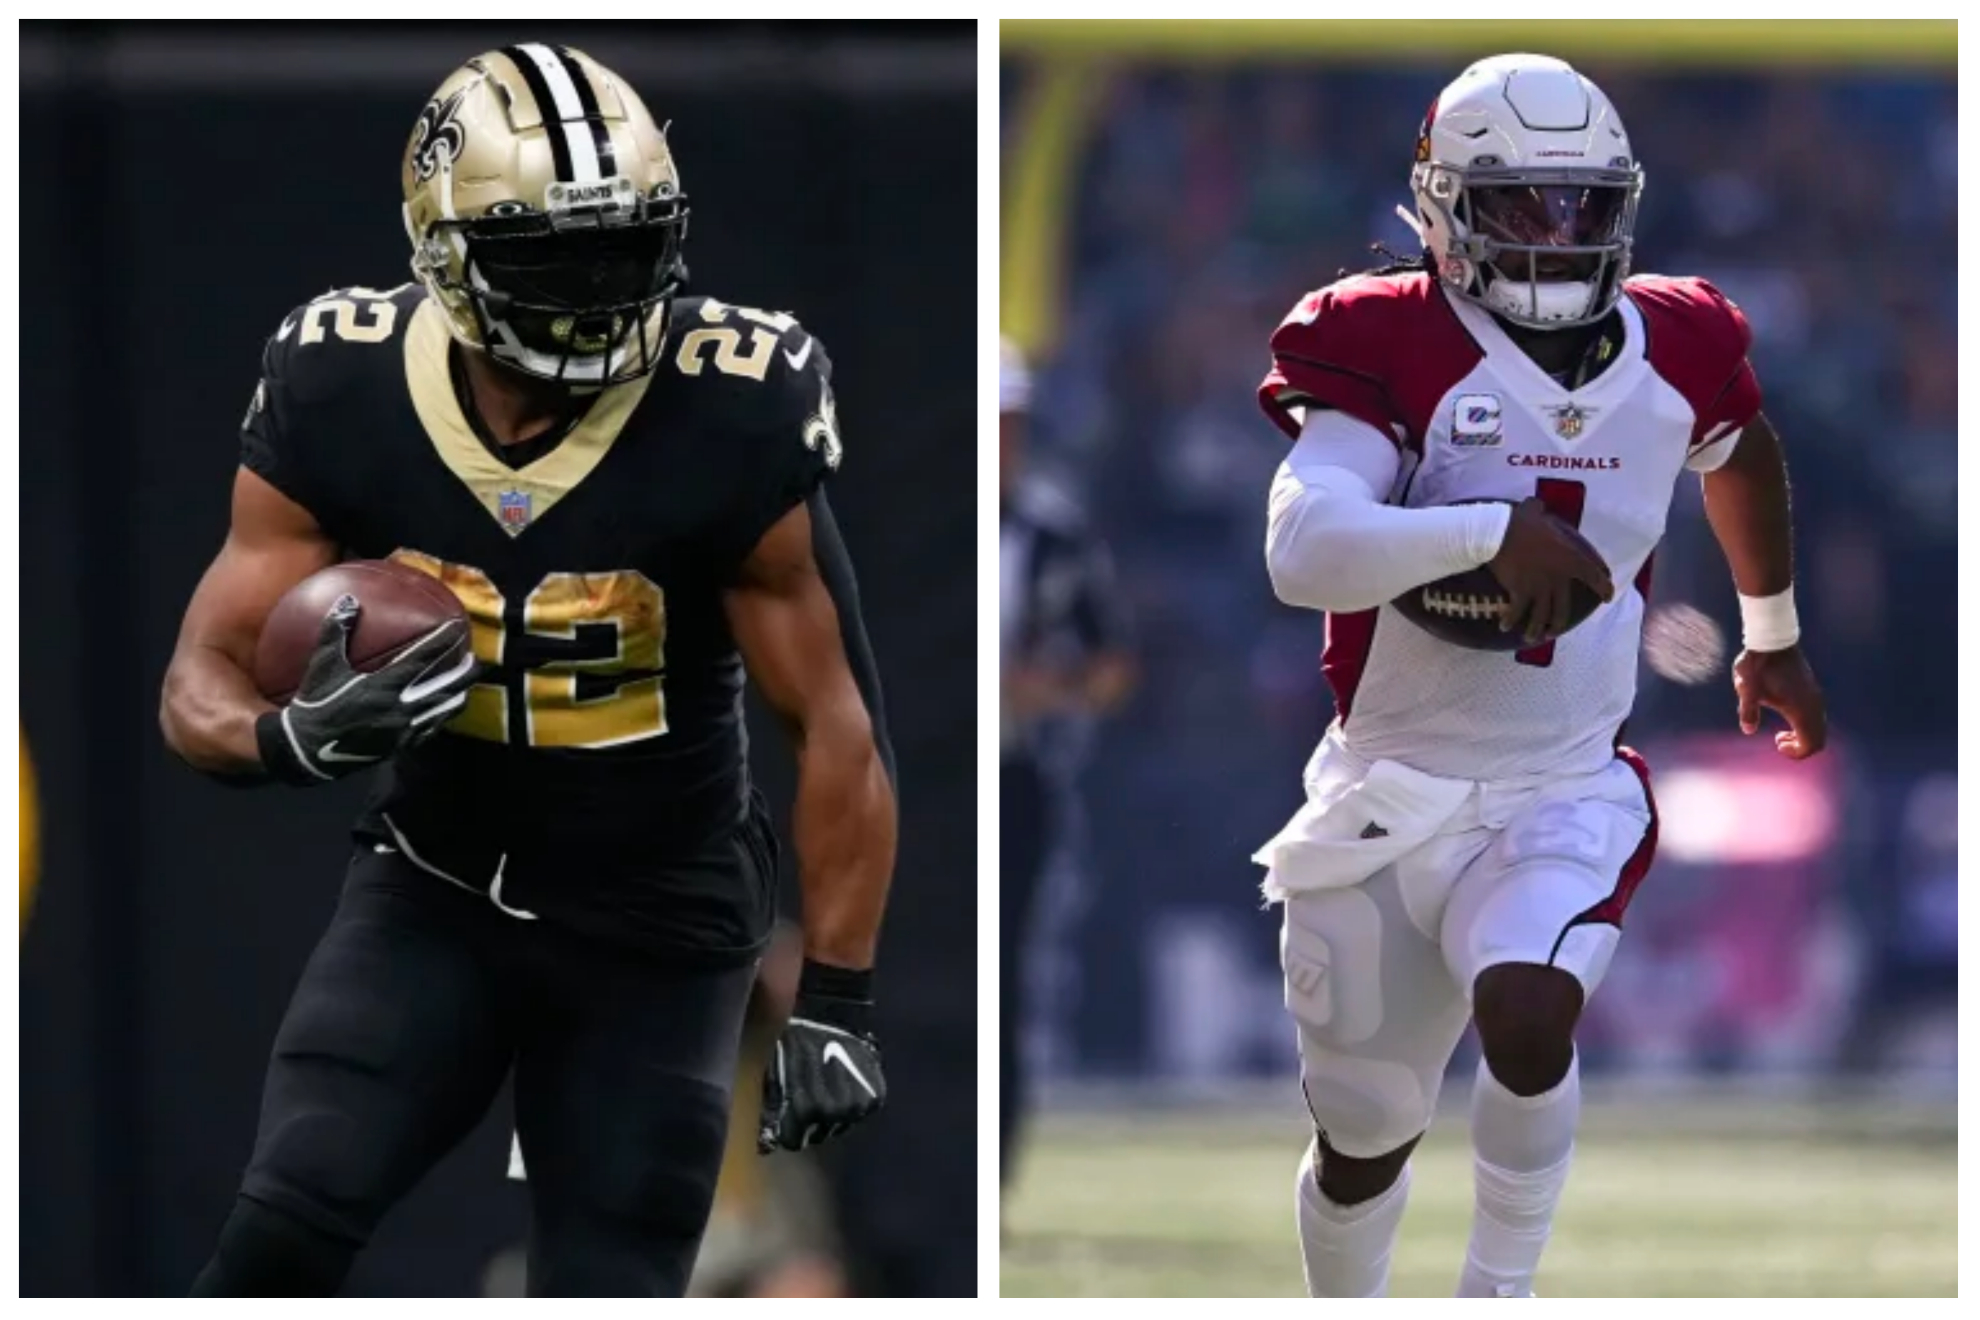 The New Orleans Saints will visit the Arizona Cardinals this Thursday night.